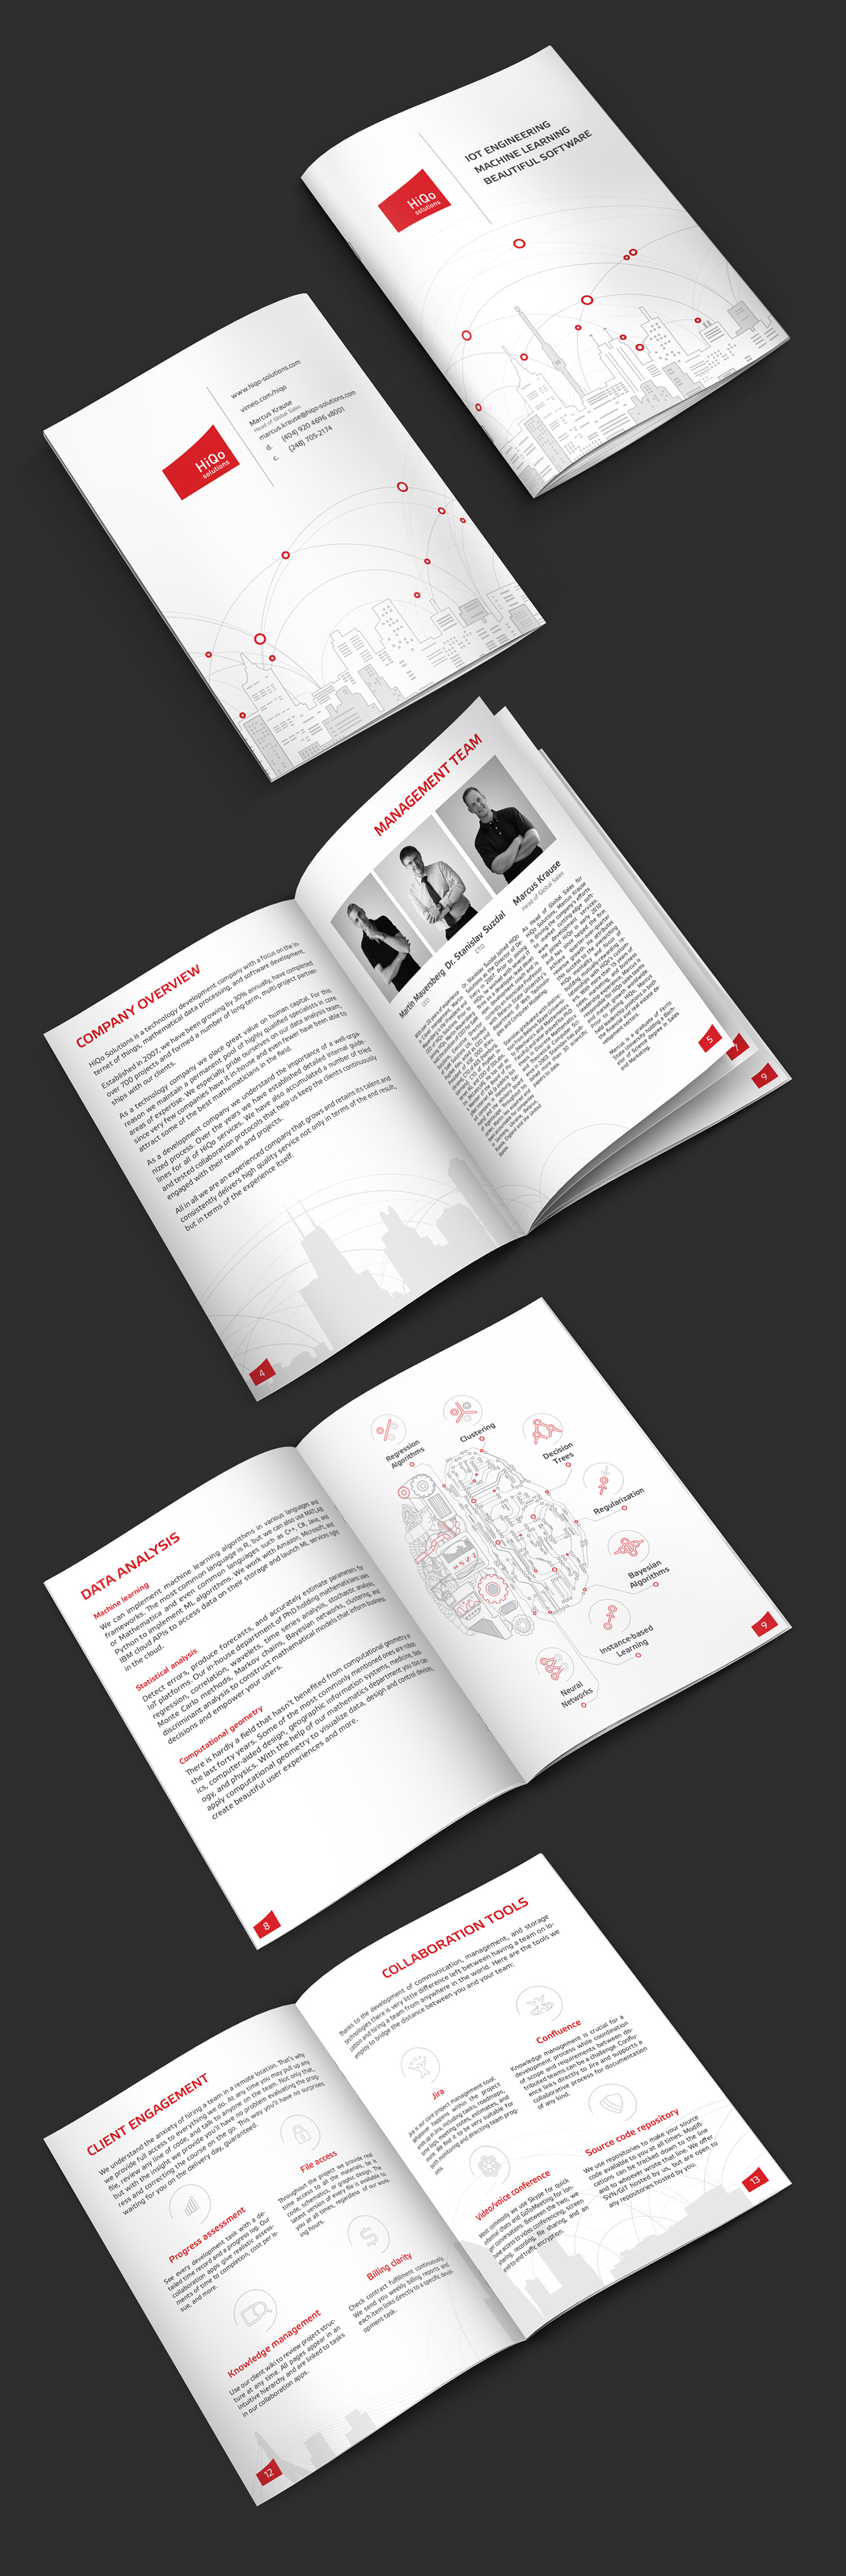 brochure software Data IoT Engineering  machine learning presentation company Client